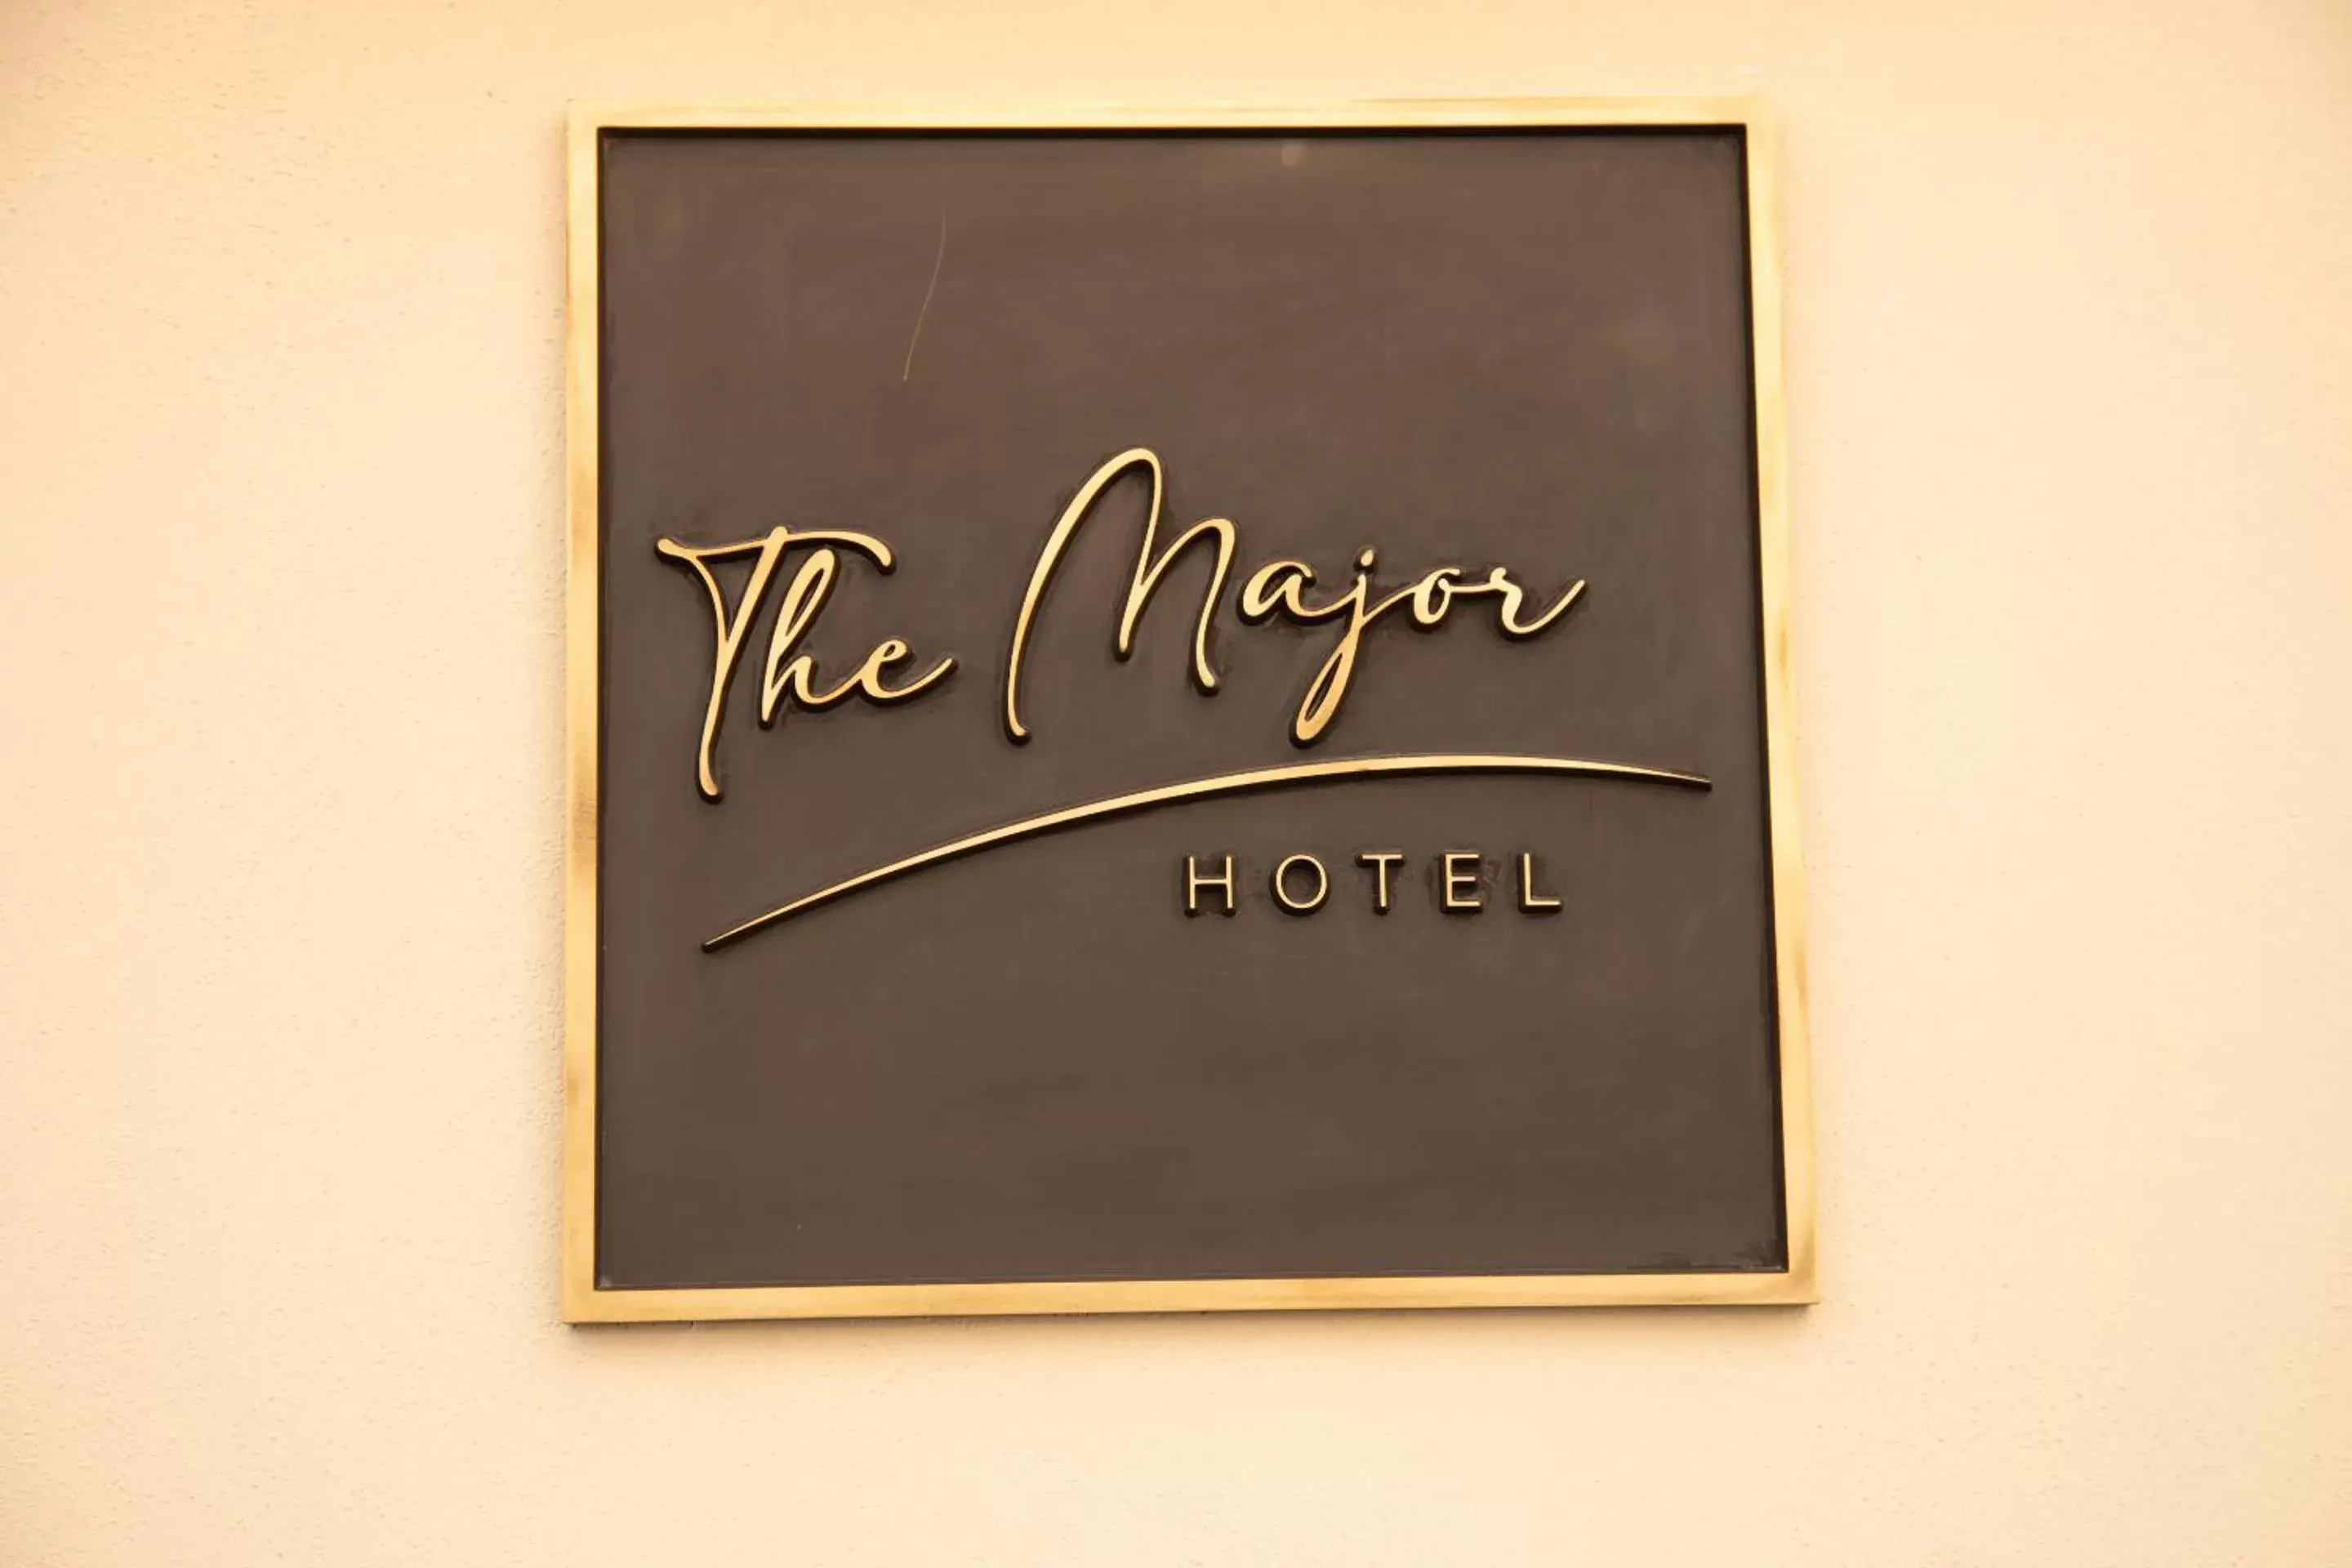 Property logo or sign in The Major Hotel